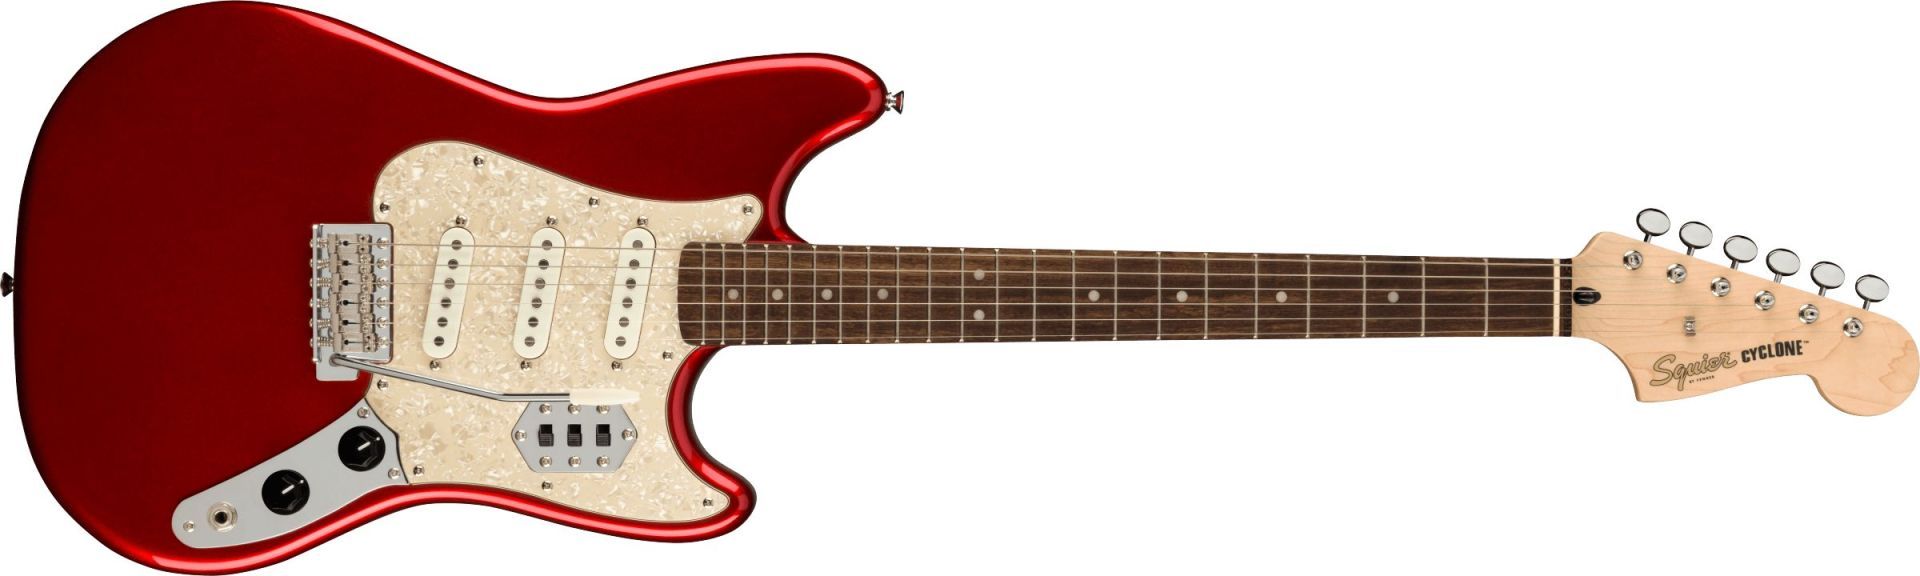 Squier Paranormal Cyclone Laurel Fingerboard Pearloid Pickguard Candy Apple Red